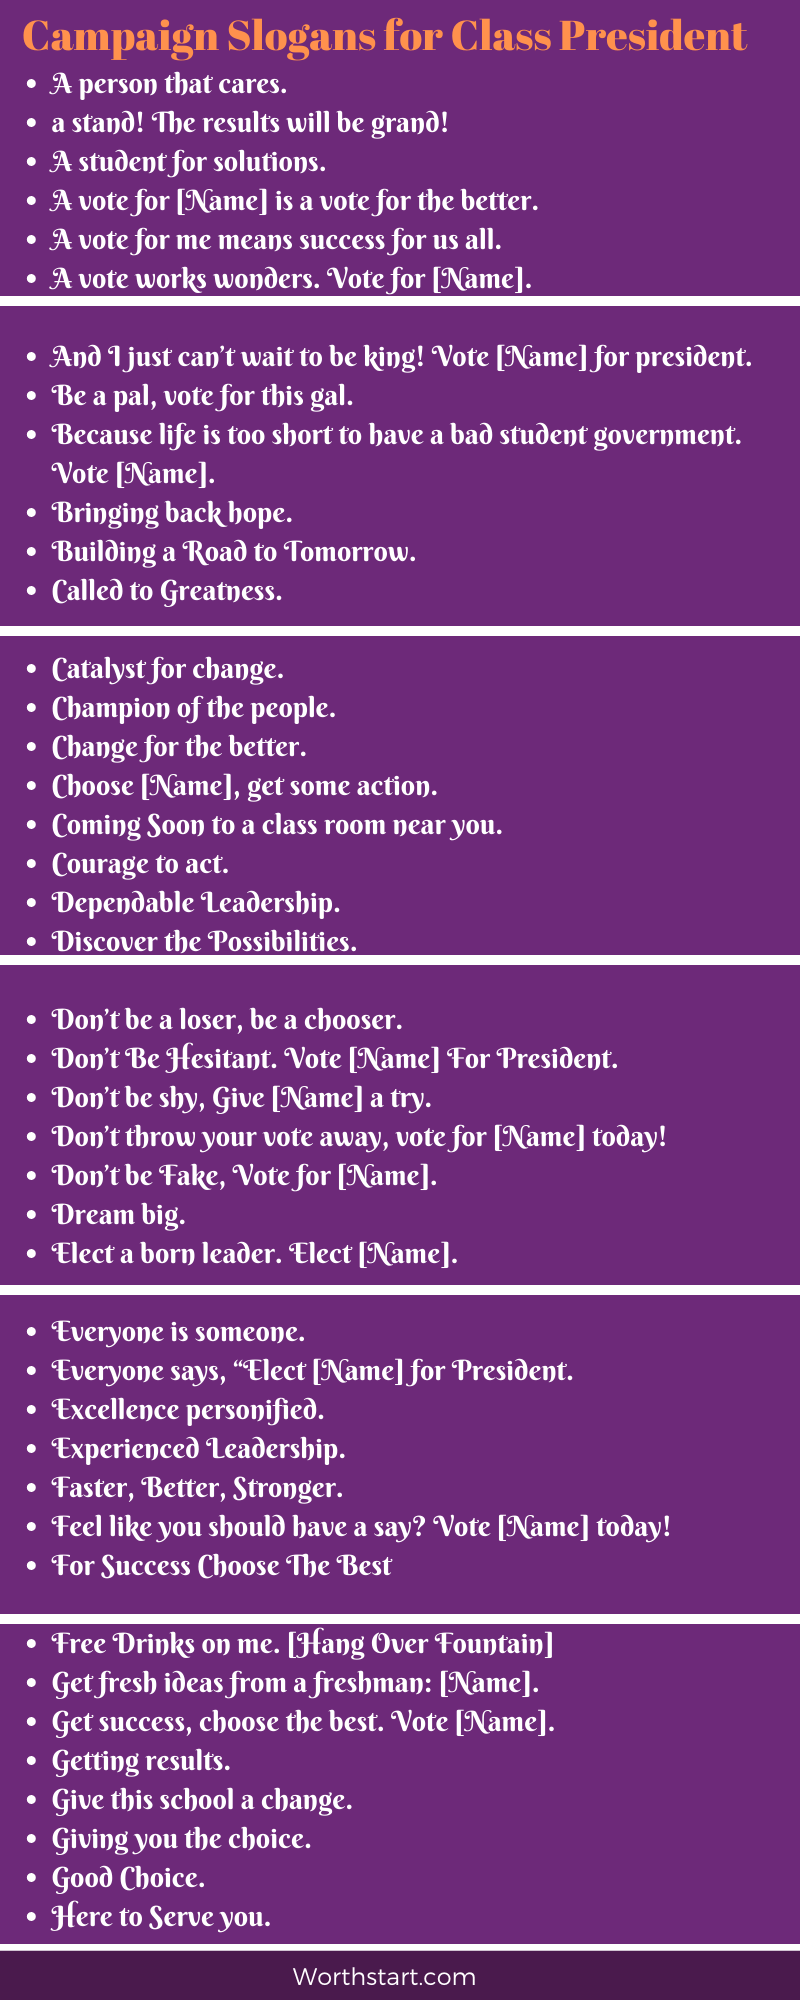 Campaign Slogans for Class President